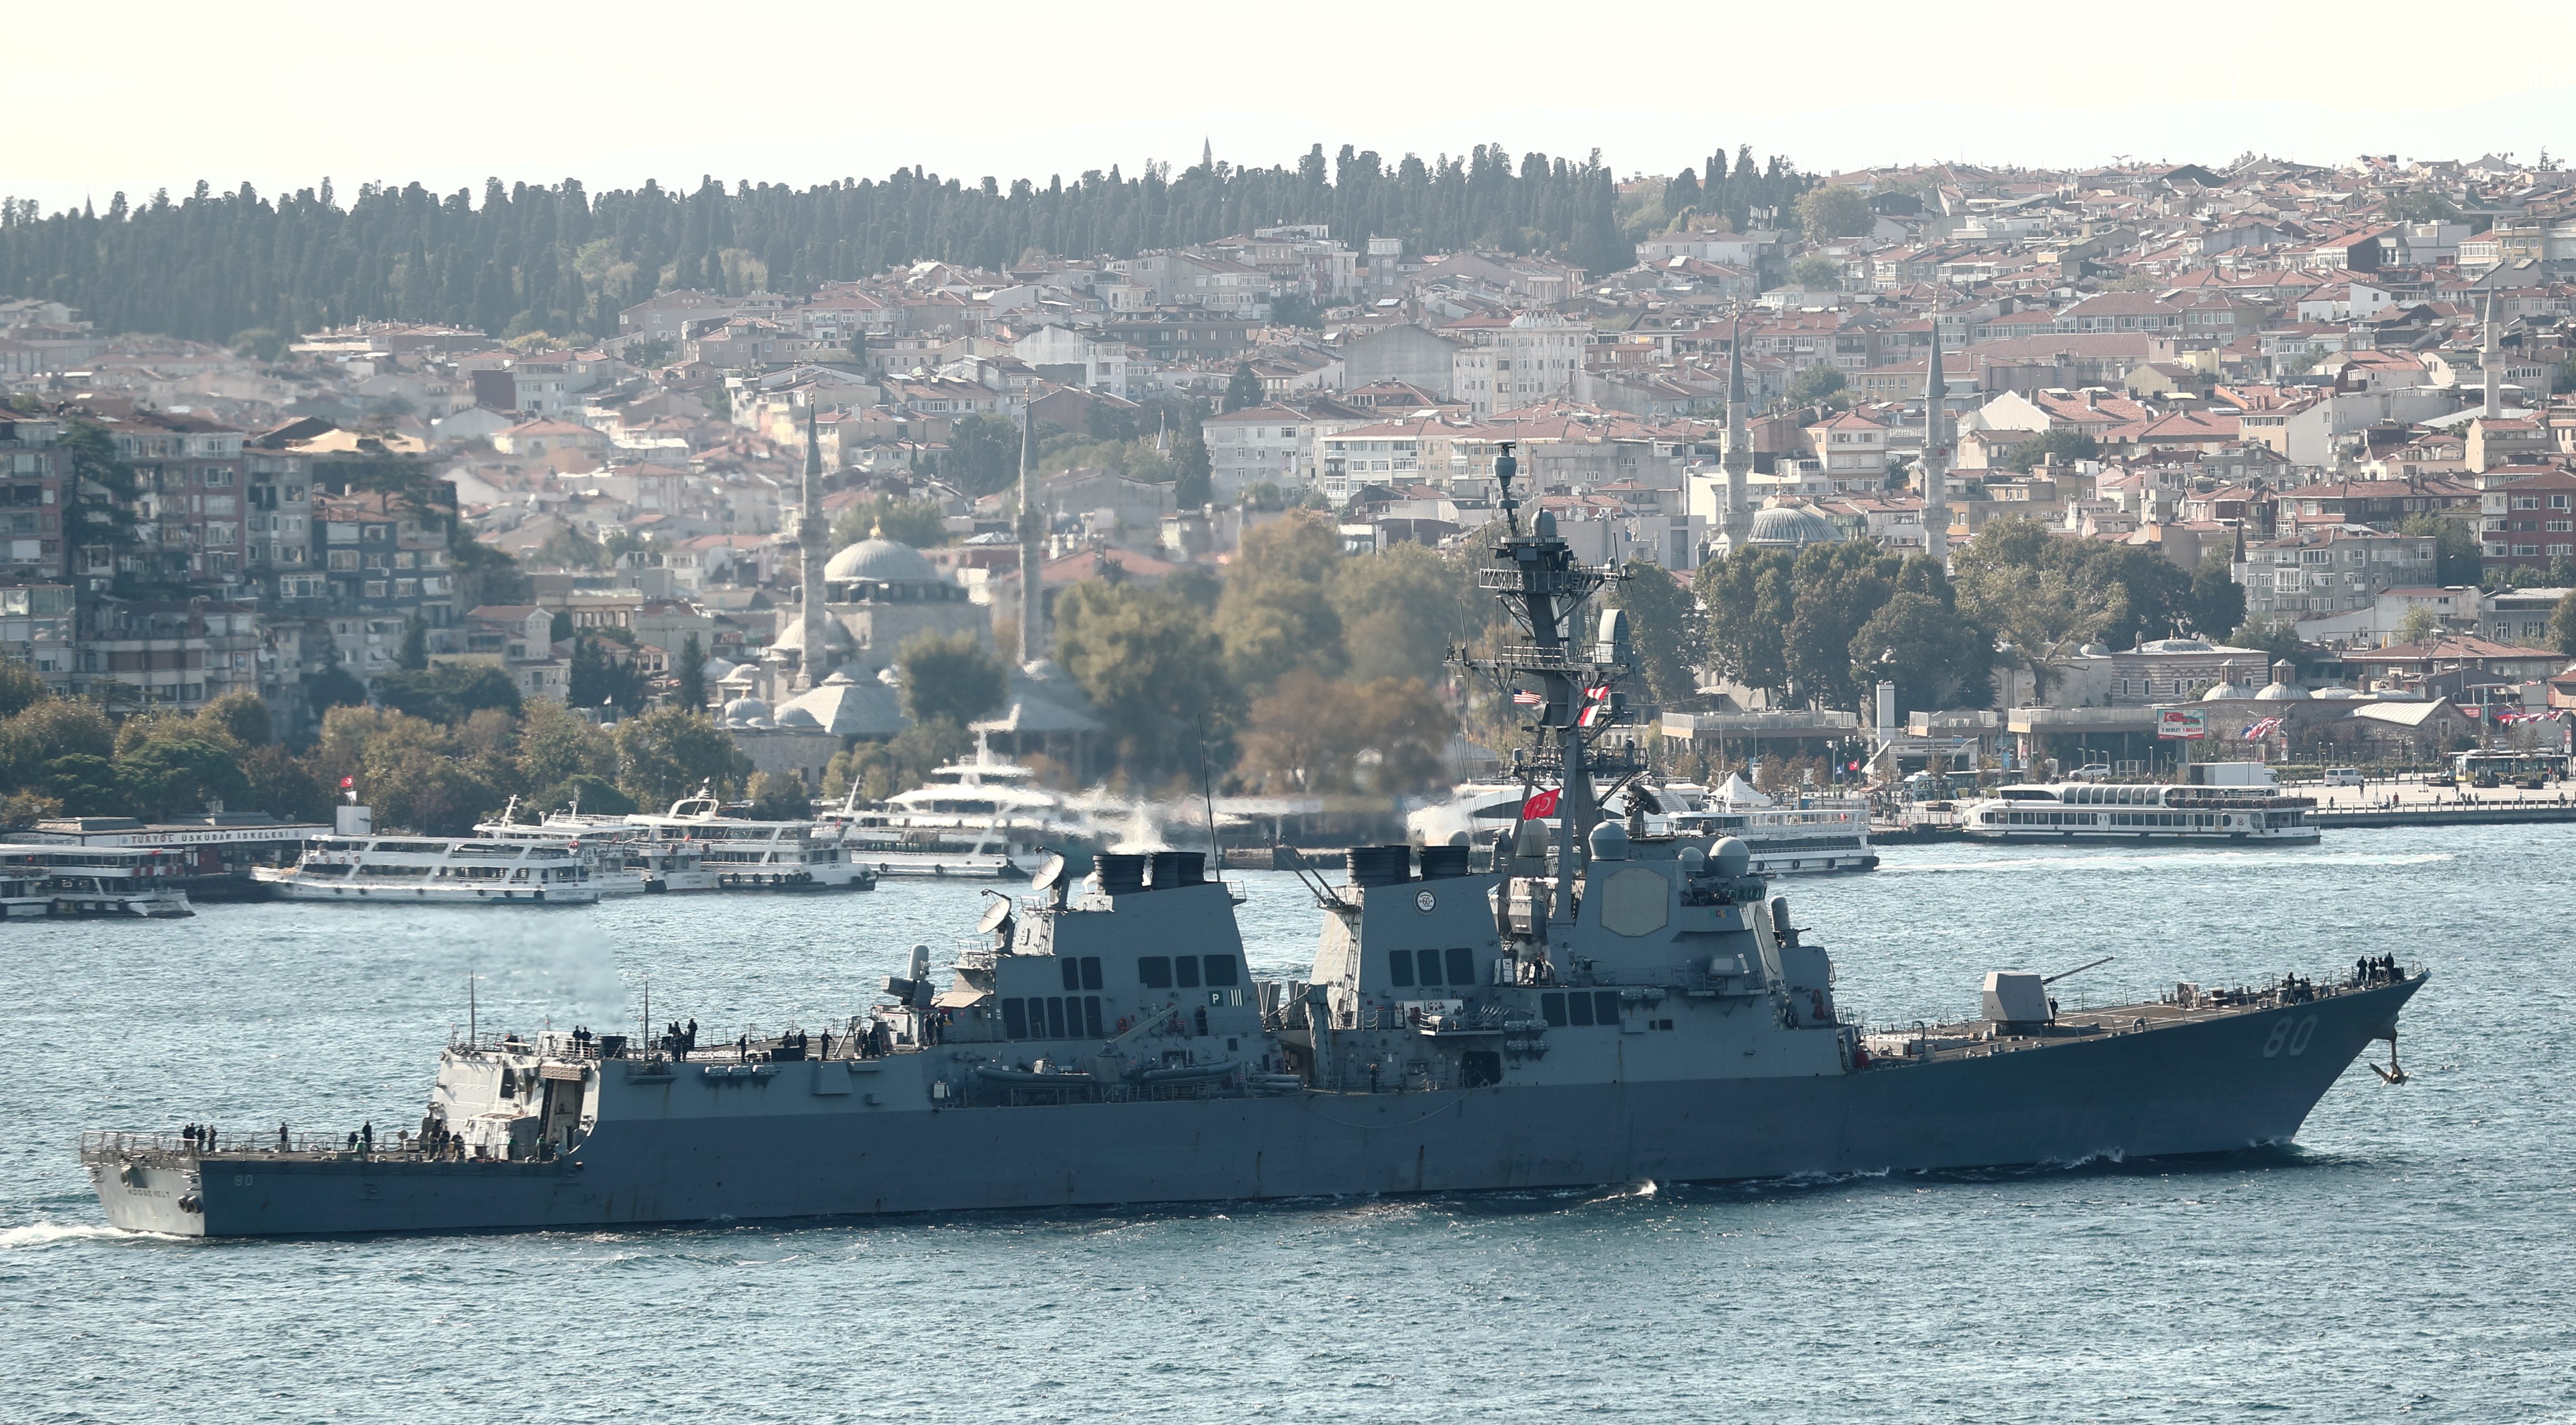 US to send two warships to Black Sea, Russia voices concerns